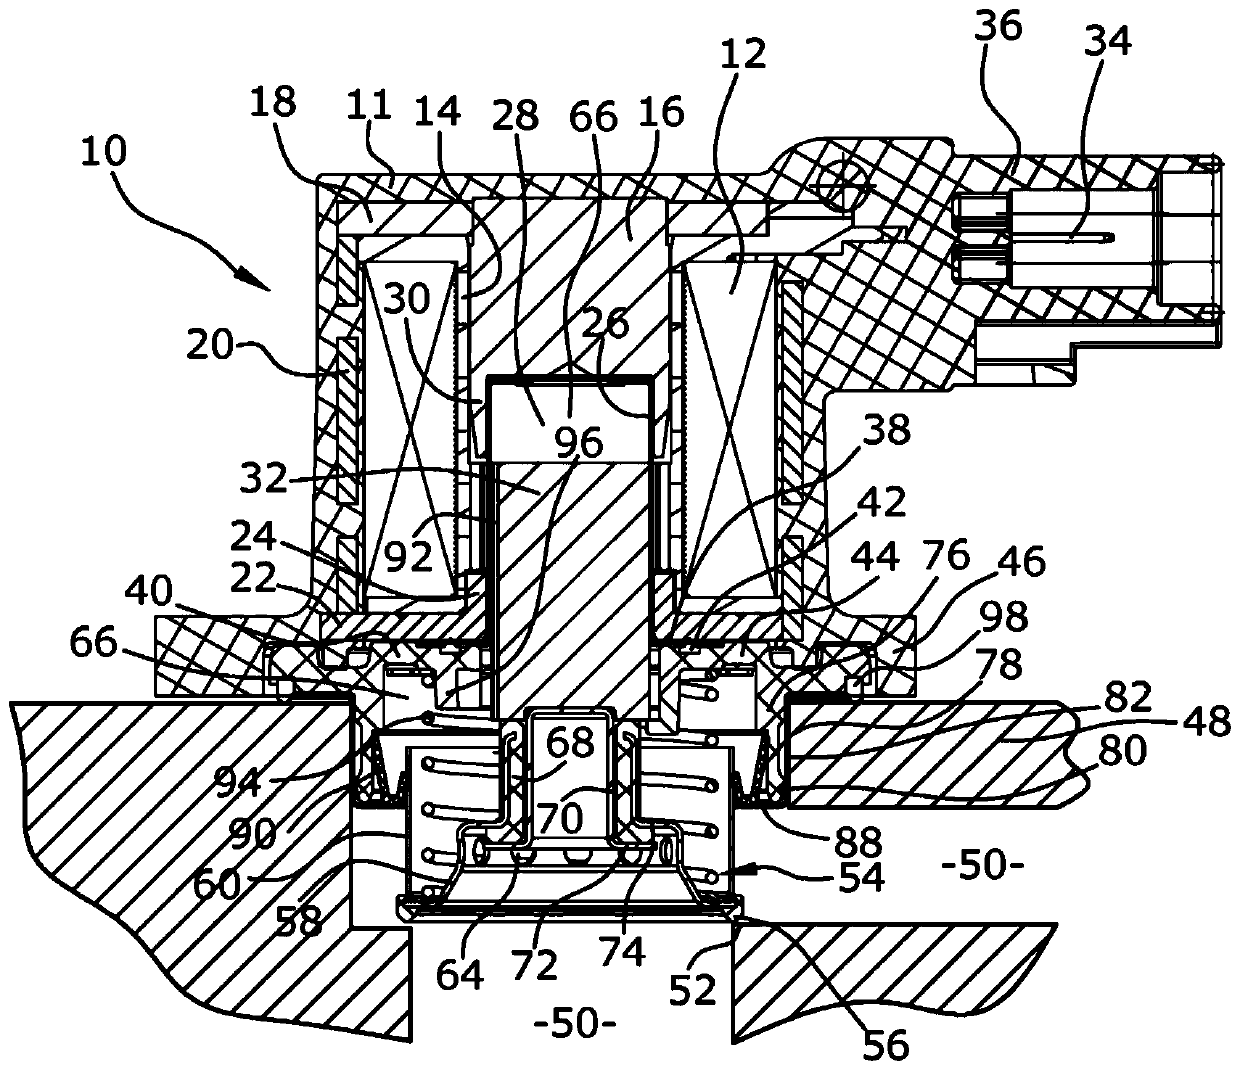 Inertial air circulation valves for compressors of internal combustion engines